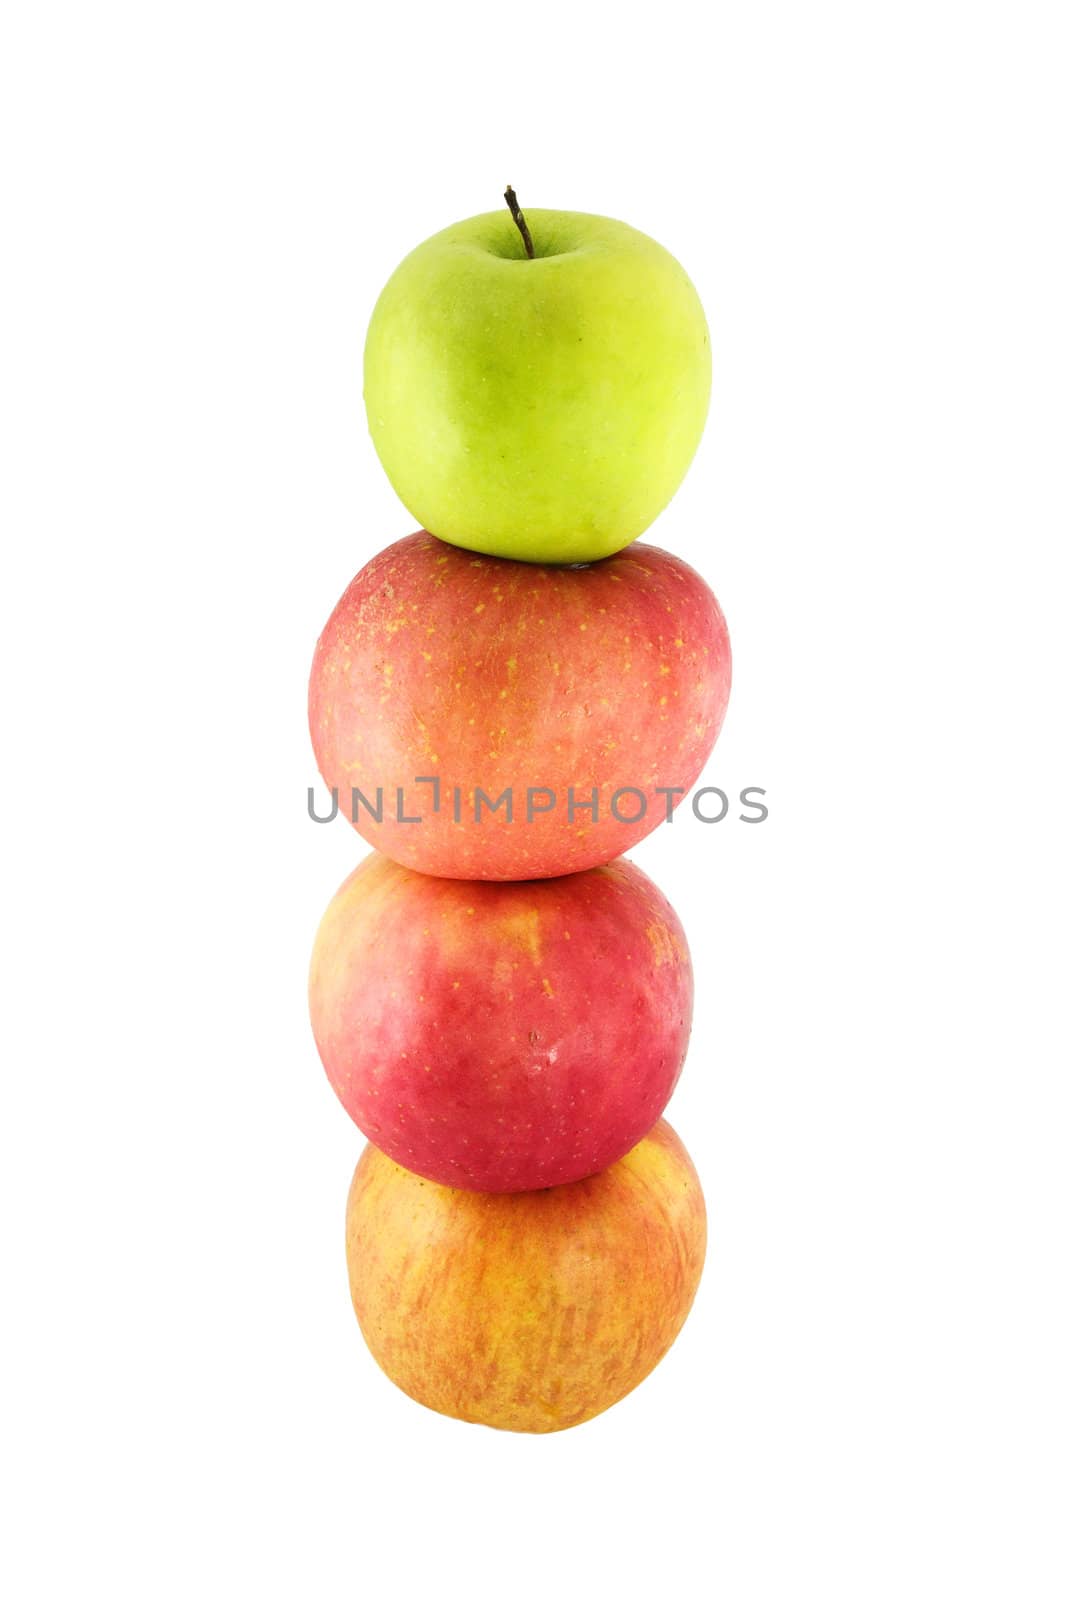 Fresh red apples stacked on top of one another with a green apple on top